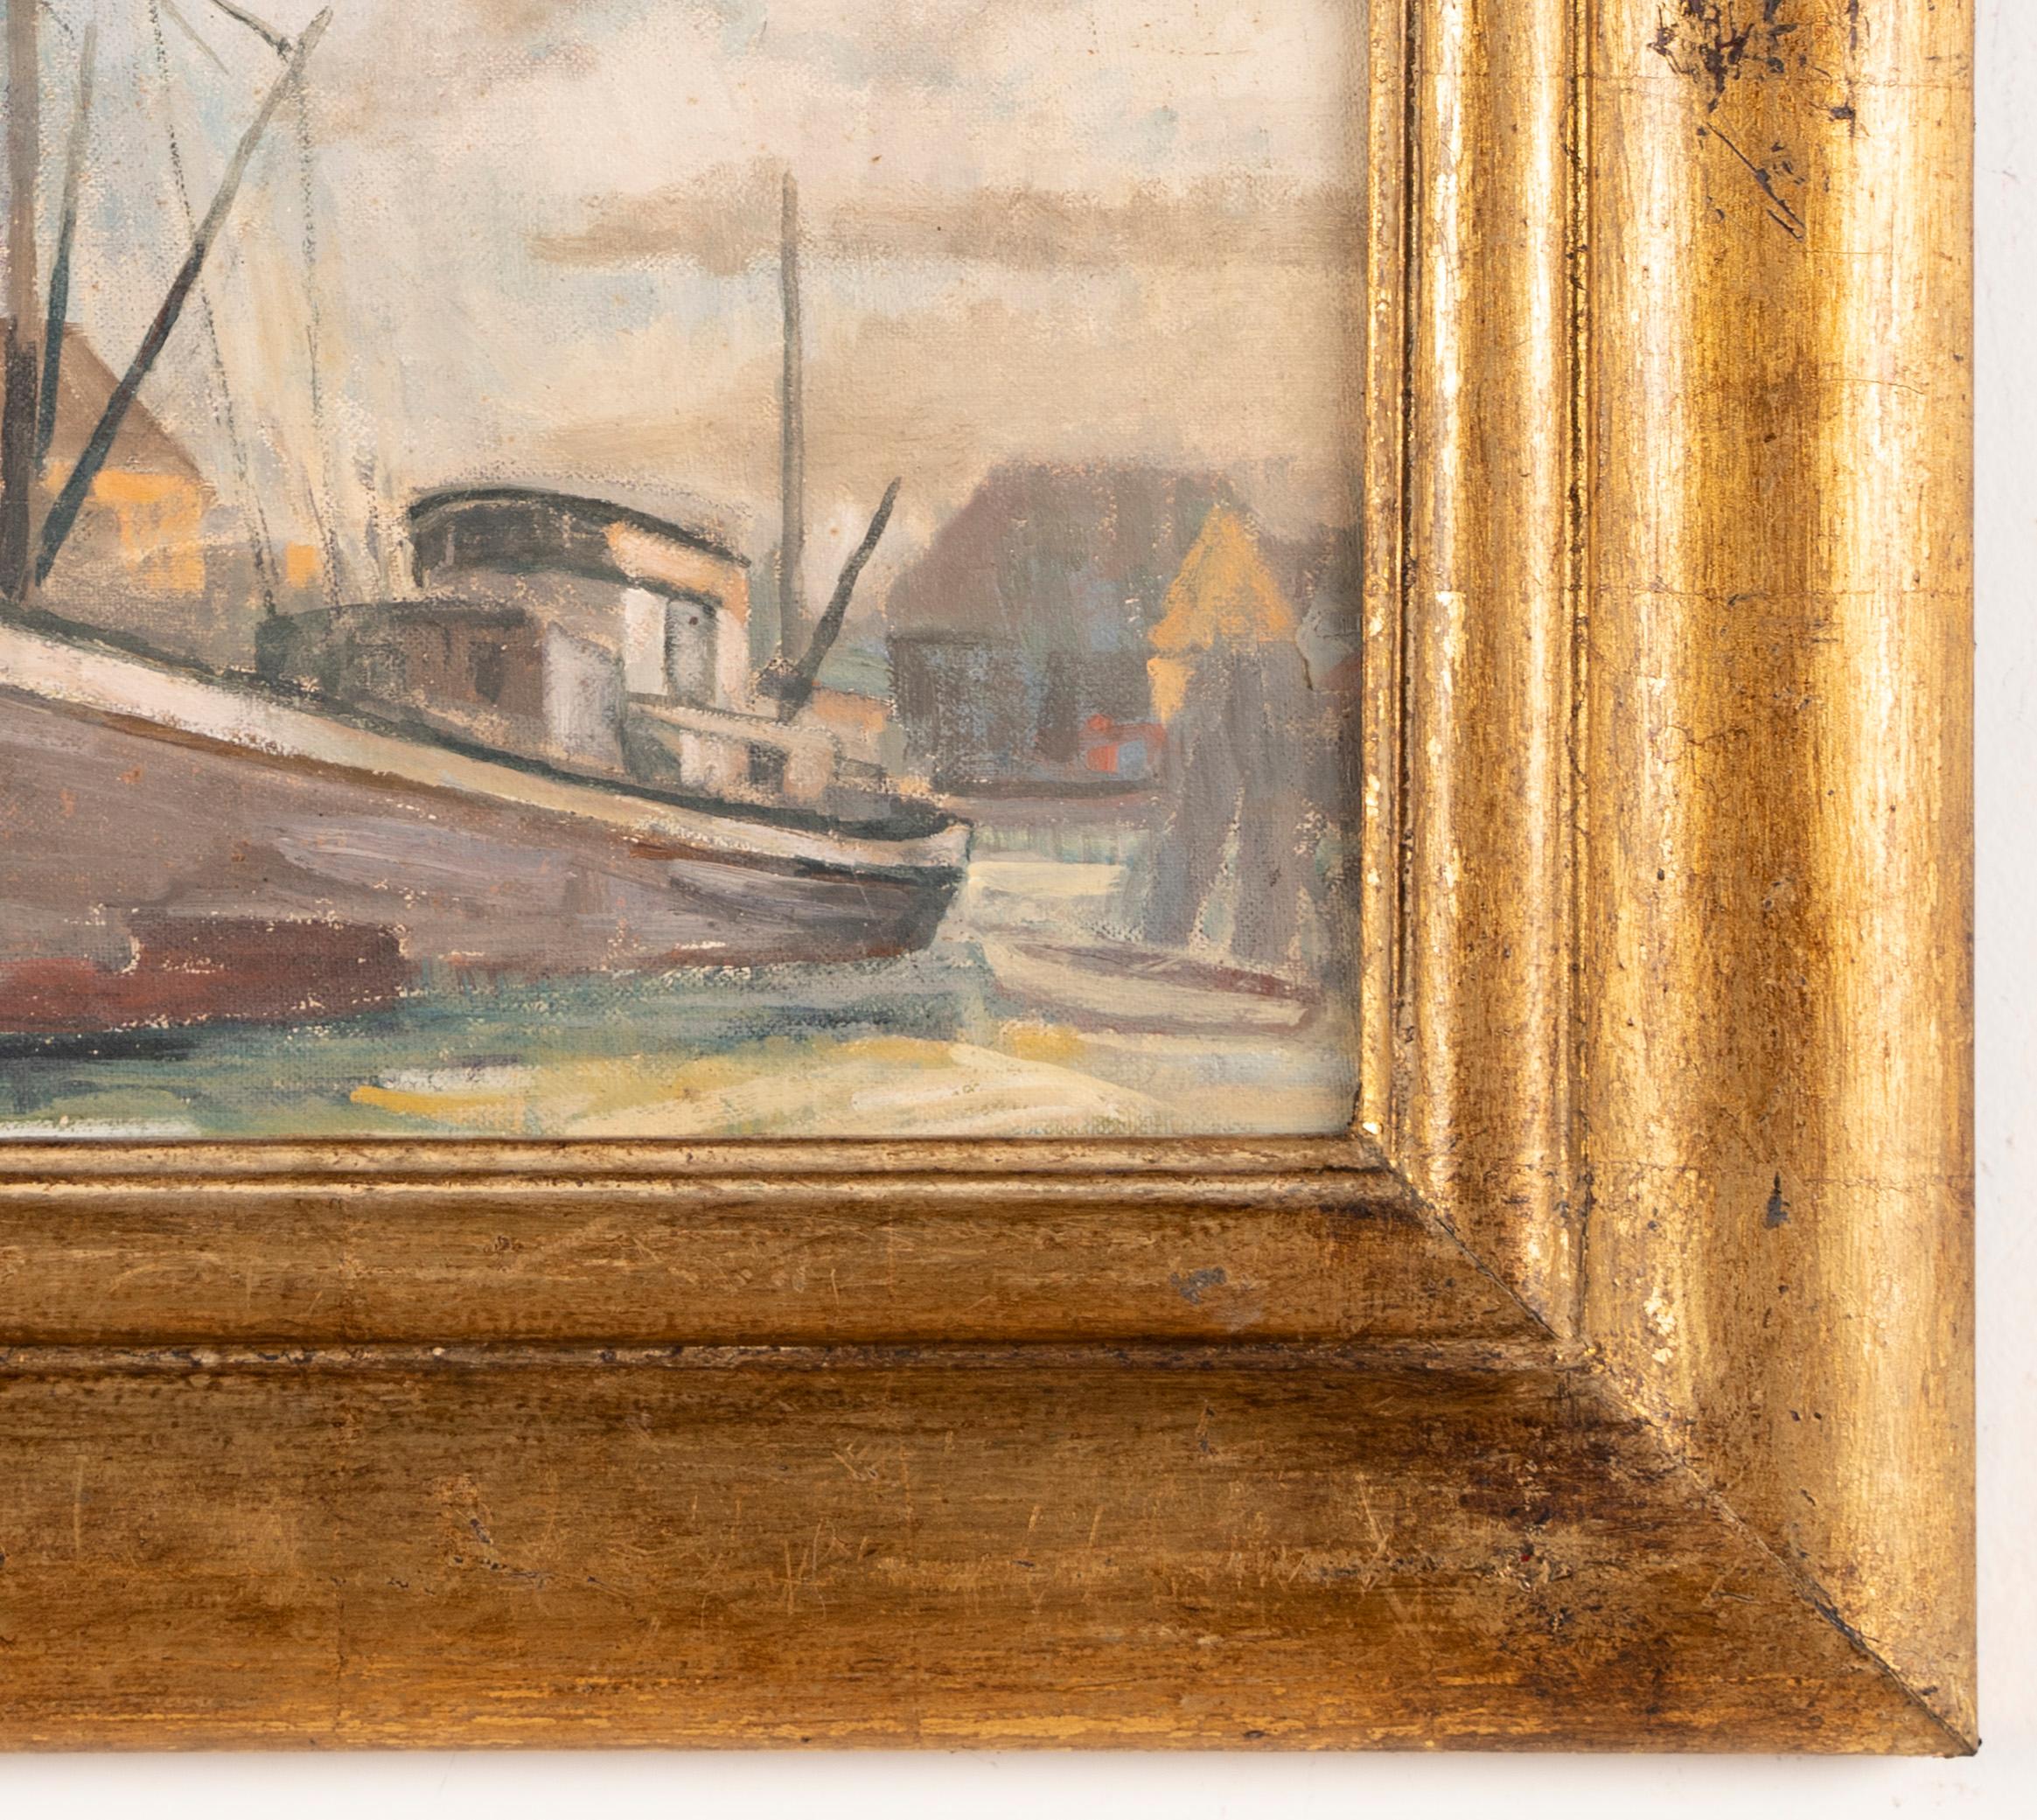 Antique American impressionist coastal seascape painting by Horace L. Shropshire, Jr. (1923 - 2010).  Oil on board, circa 1930.  Unsigned, estate stamp verso.  Image size, 10L x 8H.  Housed in a giltwood frame.
